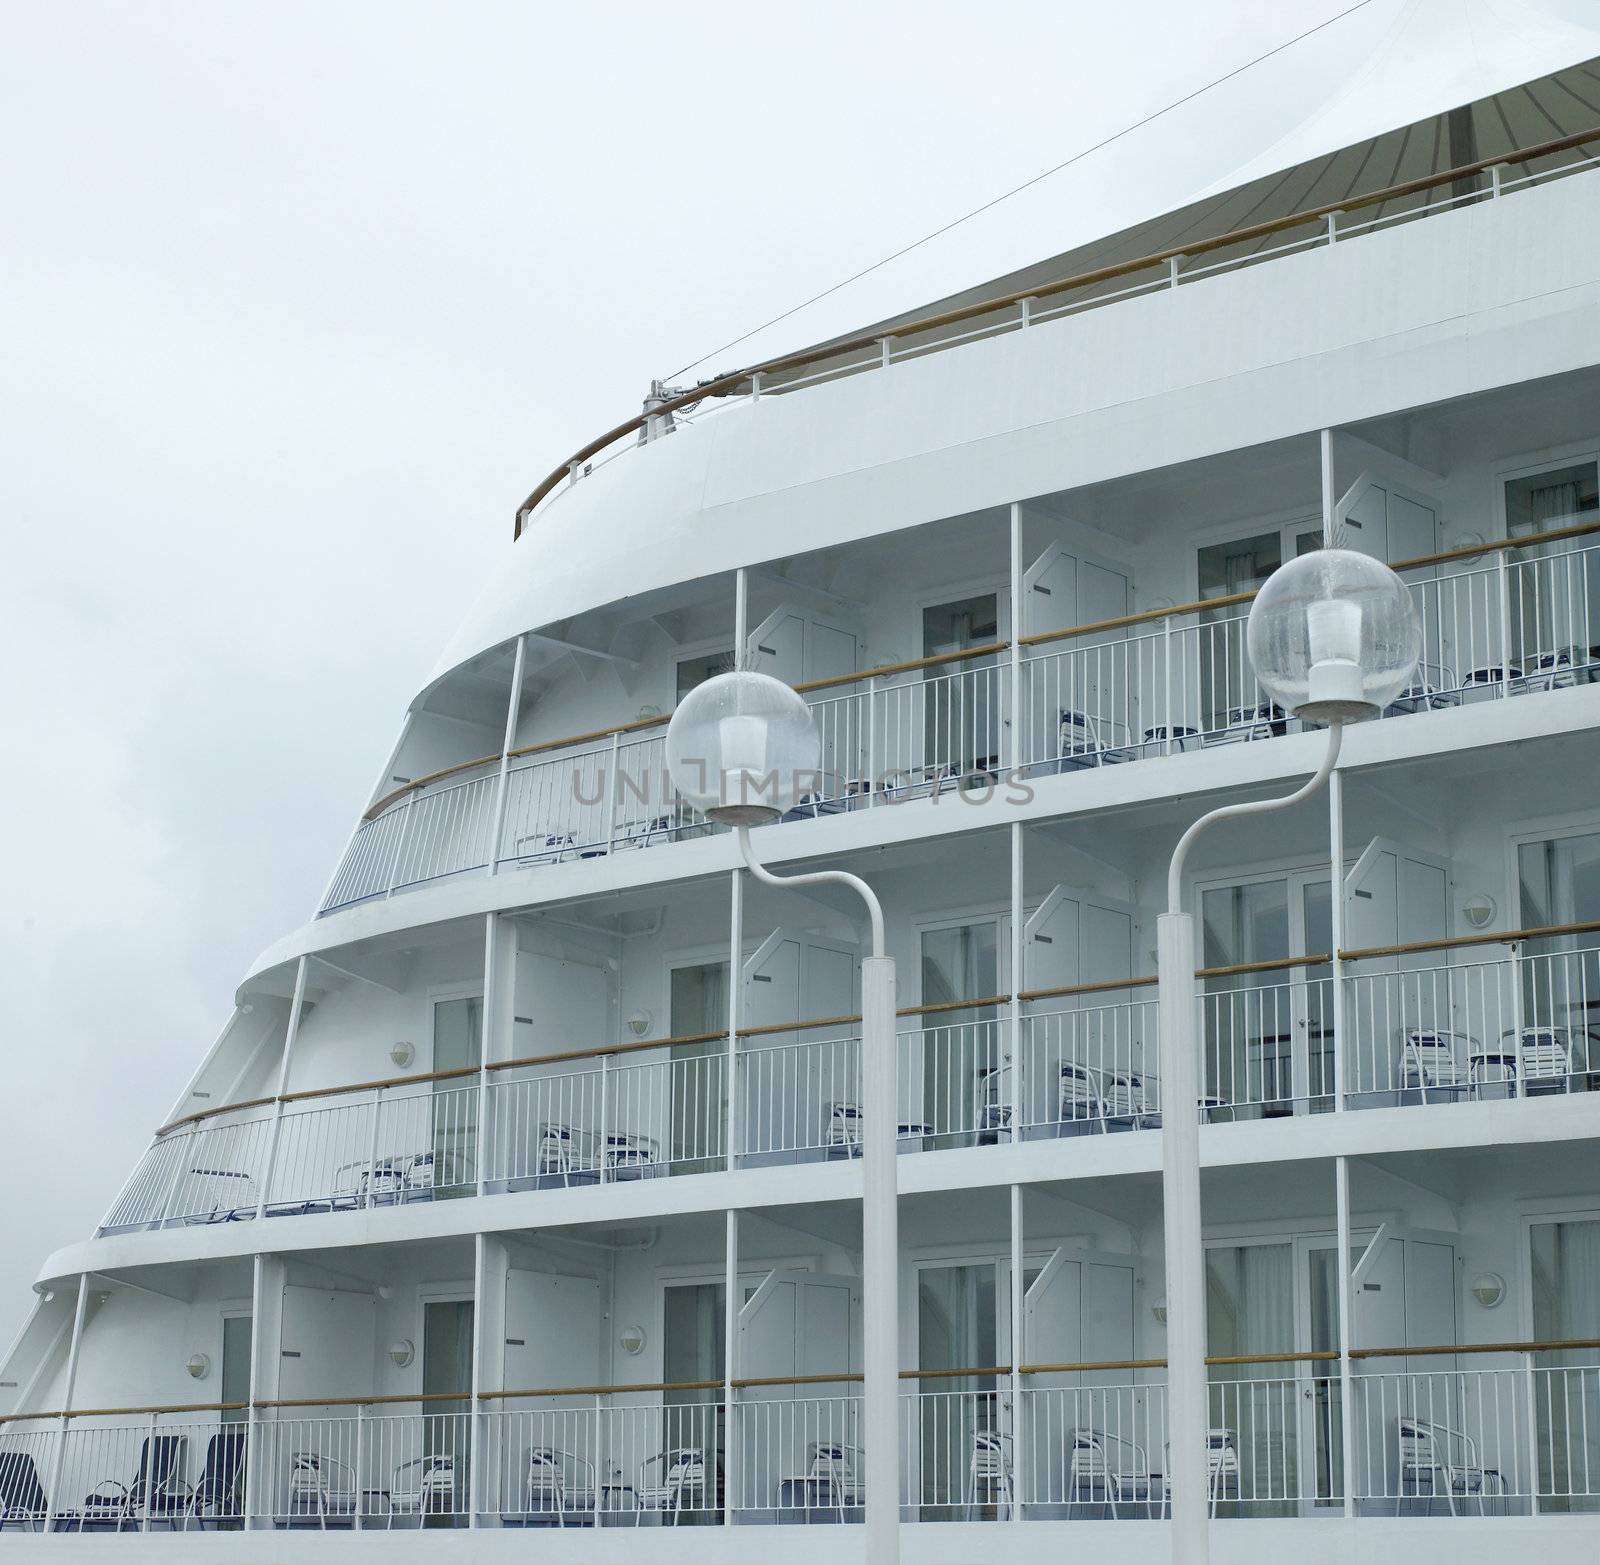 Larger cruise ship with balconies
